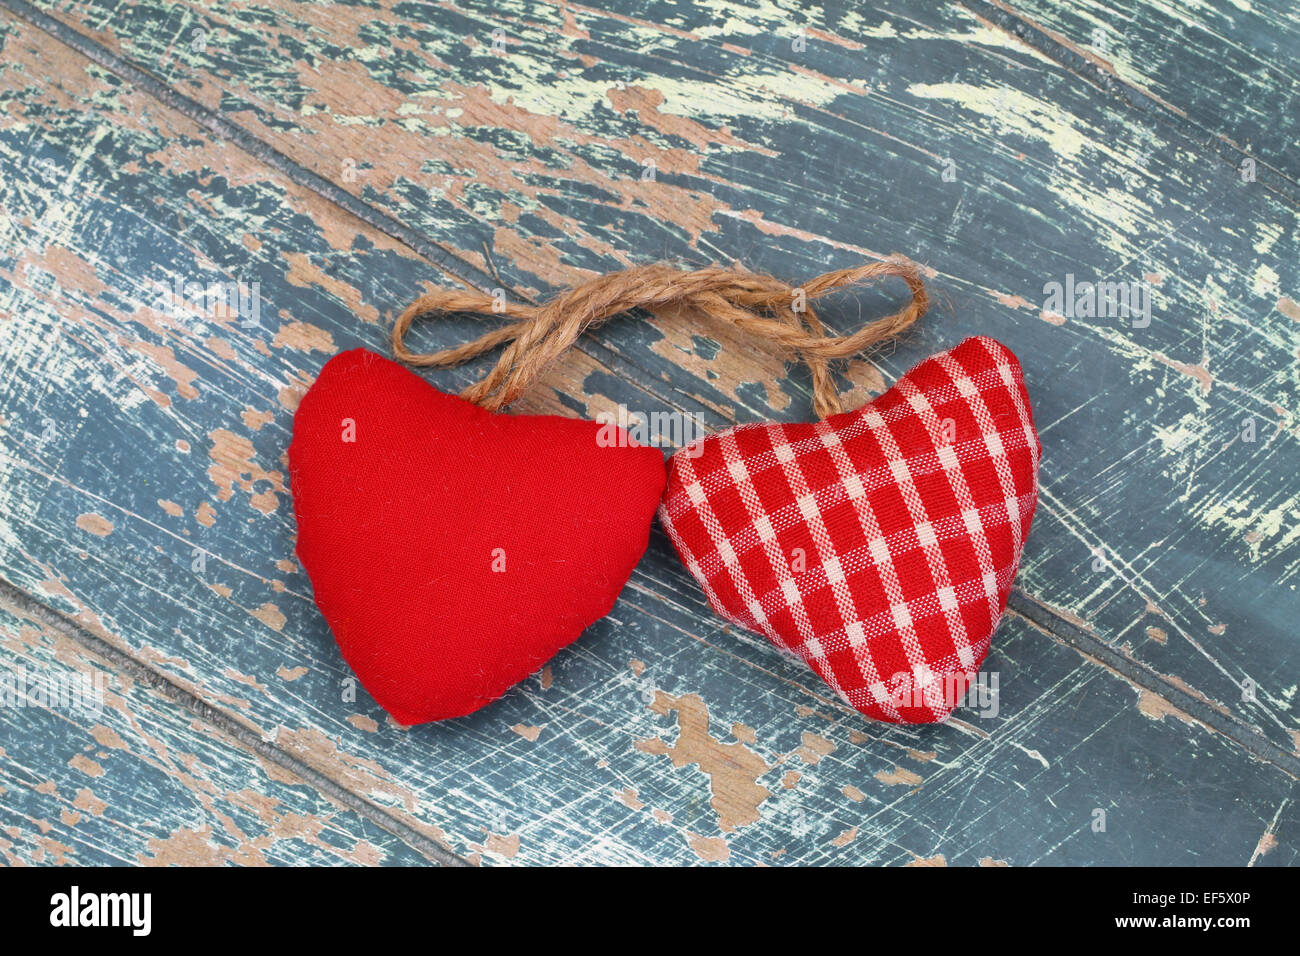 Two hearts on rustic wooden surface Stock Photo